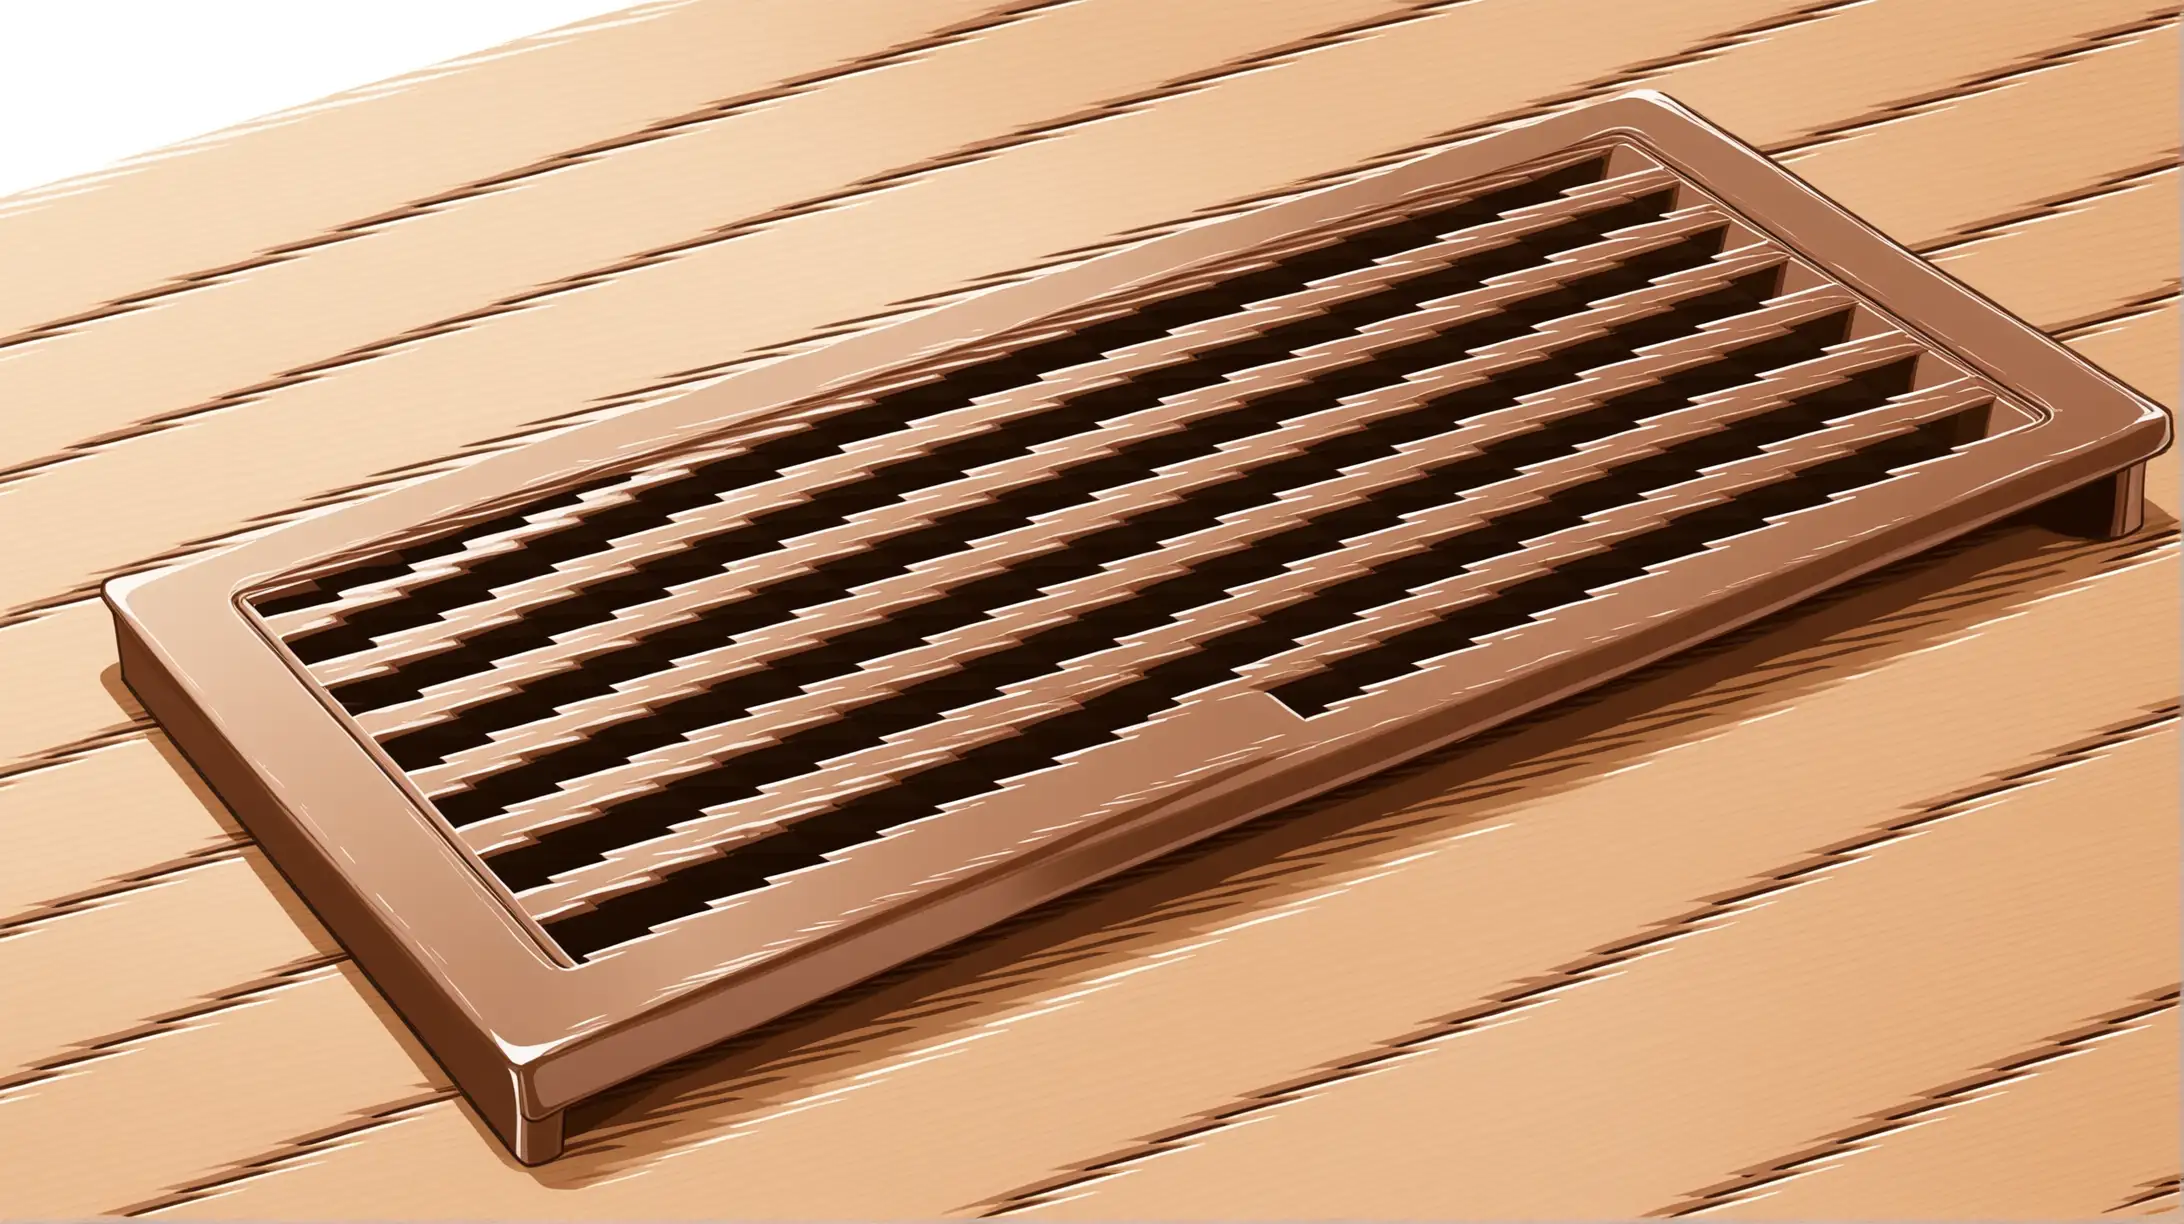 Illustration of a rectangular brown floor vent on a white background. Close up